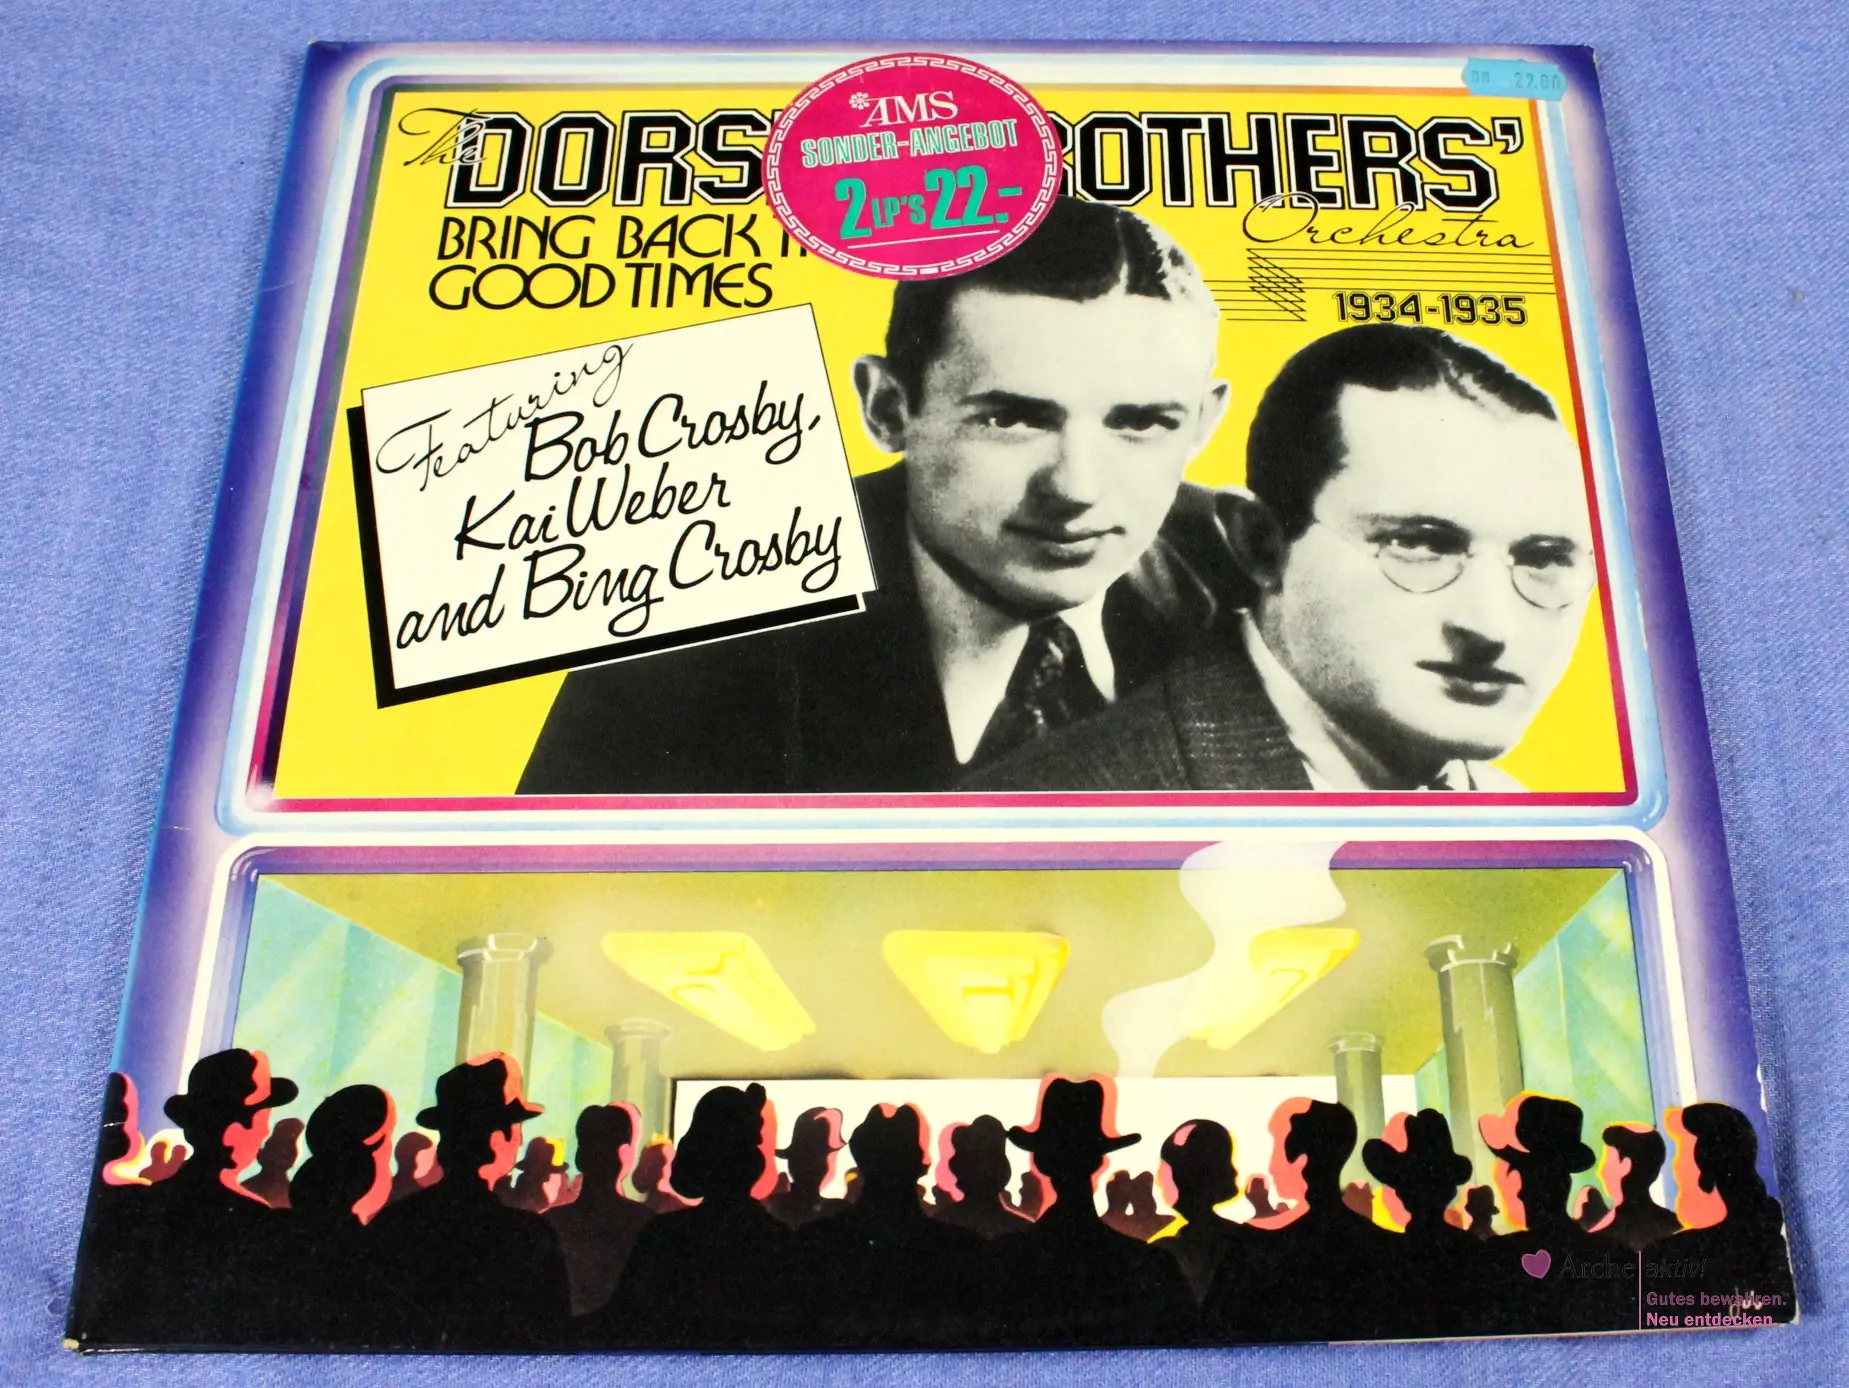 Dorsey Brothers - Bring Back The Good Times 1934-1935 (Vinyl) 2 LPs, gebraucht